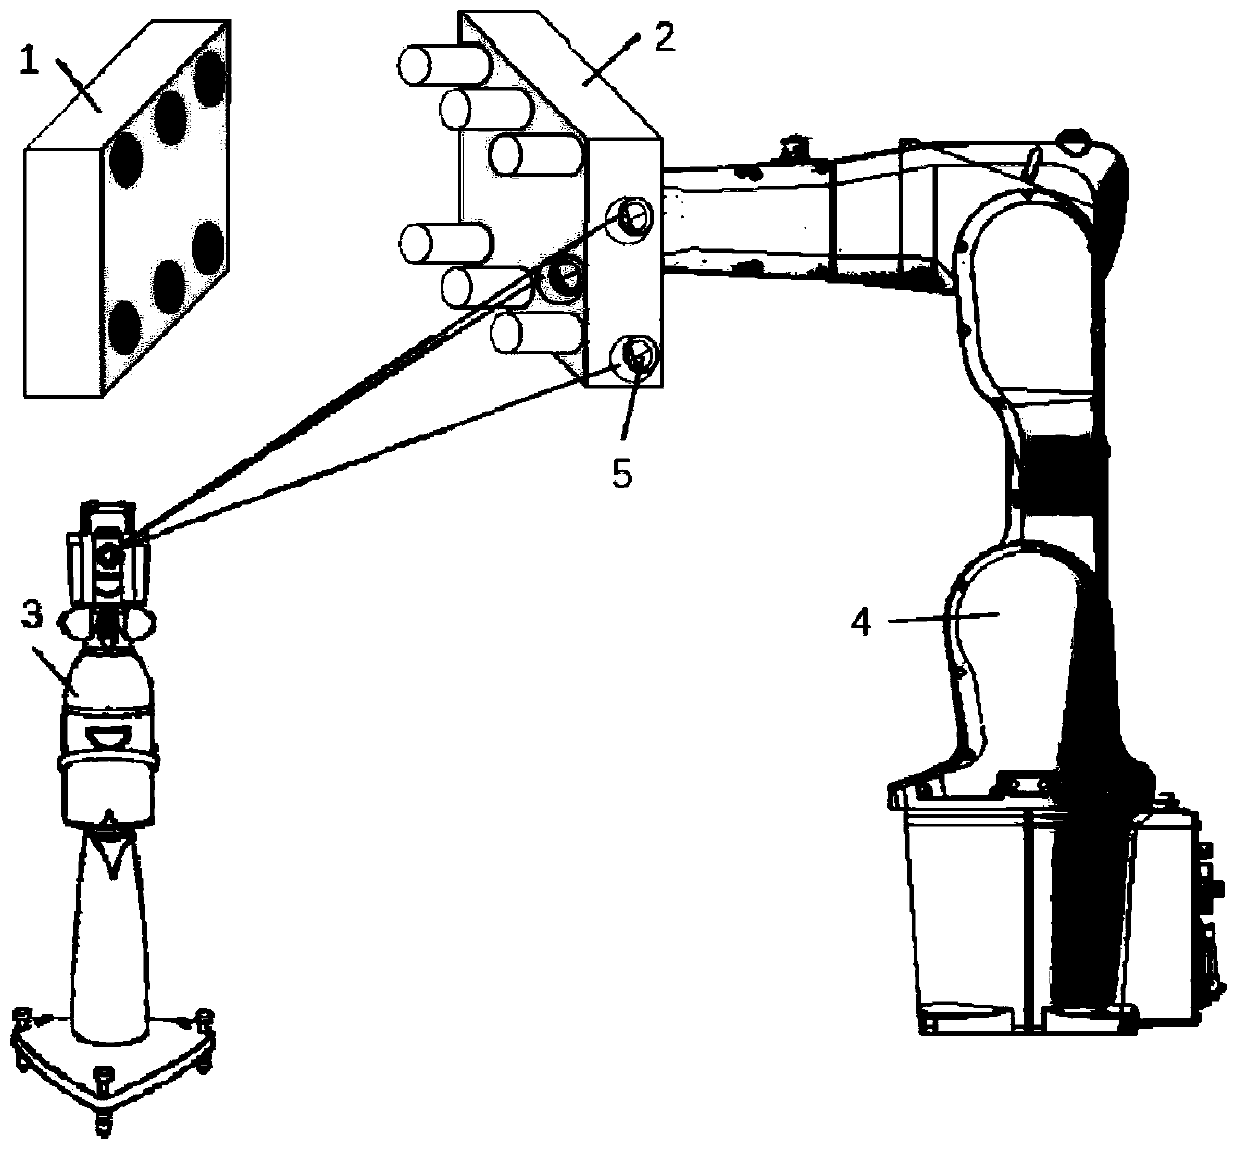 An automatic alignment method for multi-axis holes based on laser tracker